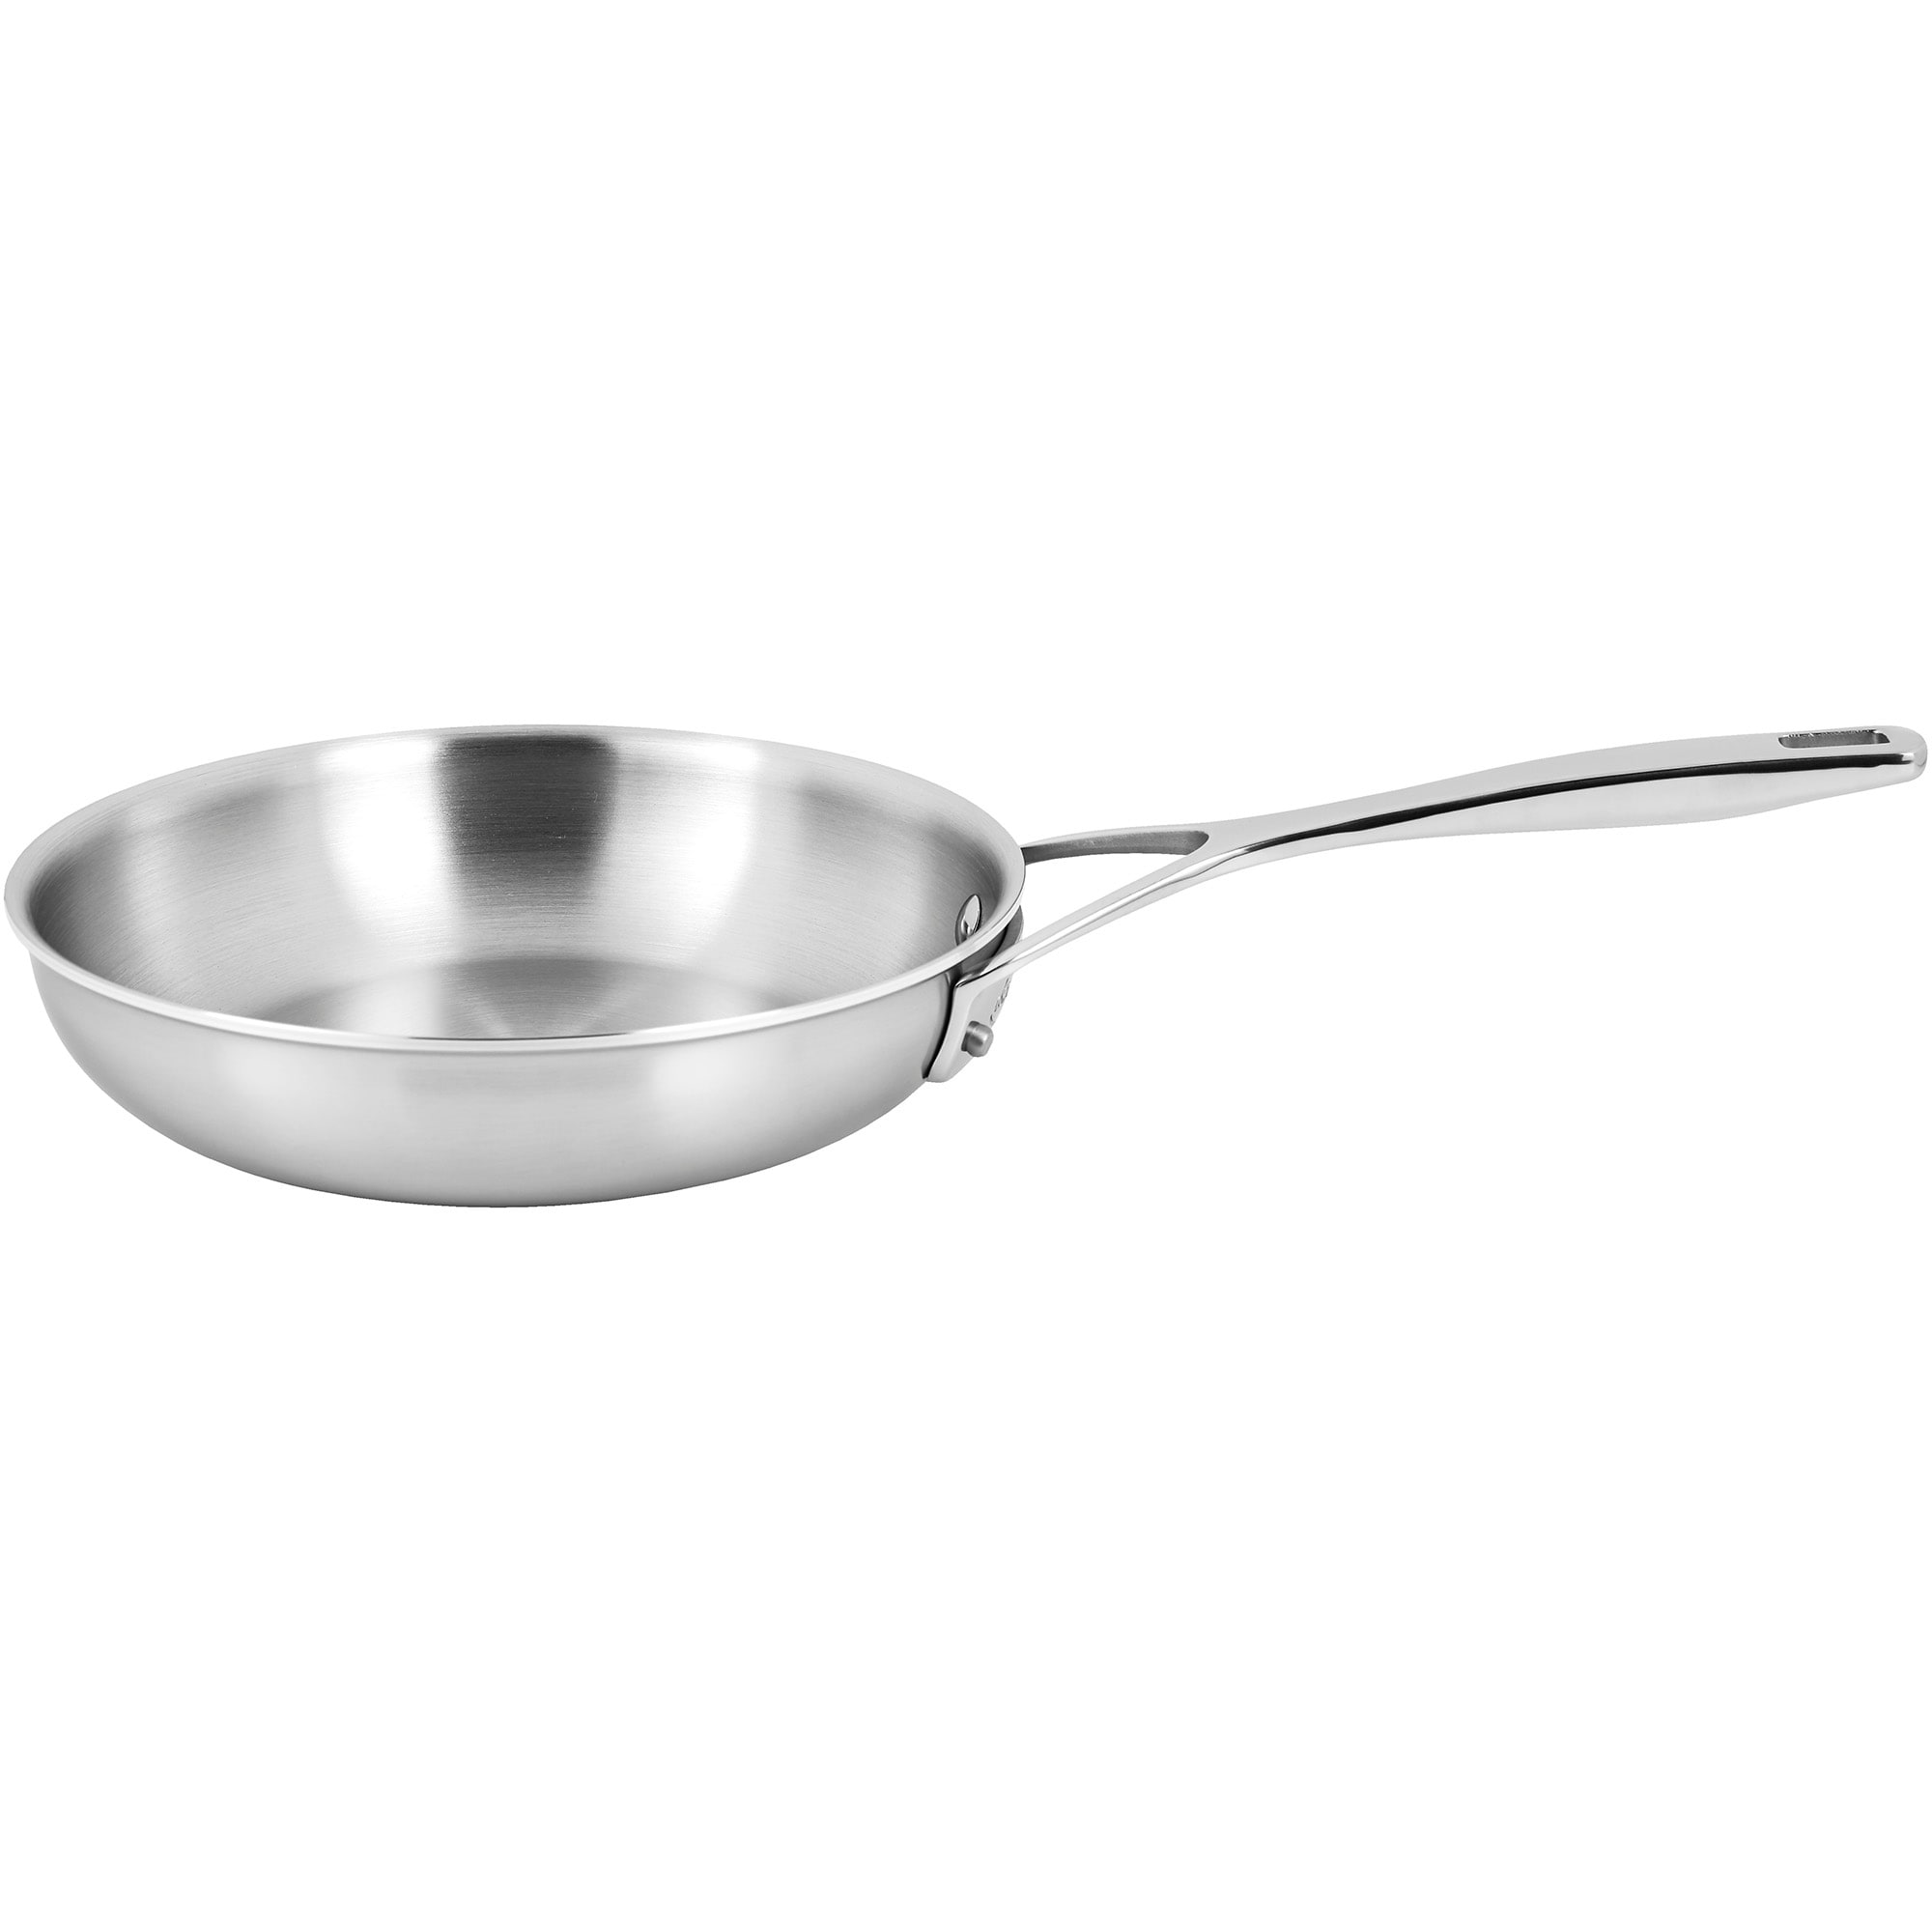 https://ak1.ostkcdn.com/images/products/is/images/direct/8ffdbac5288708de8f577e3d7f28cadec487703d/DEMEYERE-Essential-5-ply-Stainless-Steel-Fry-Pan.jpg